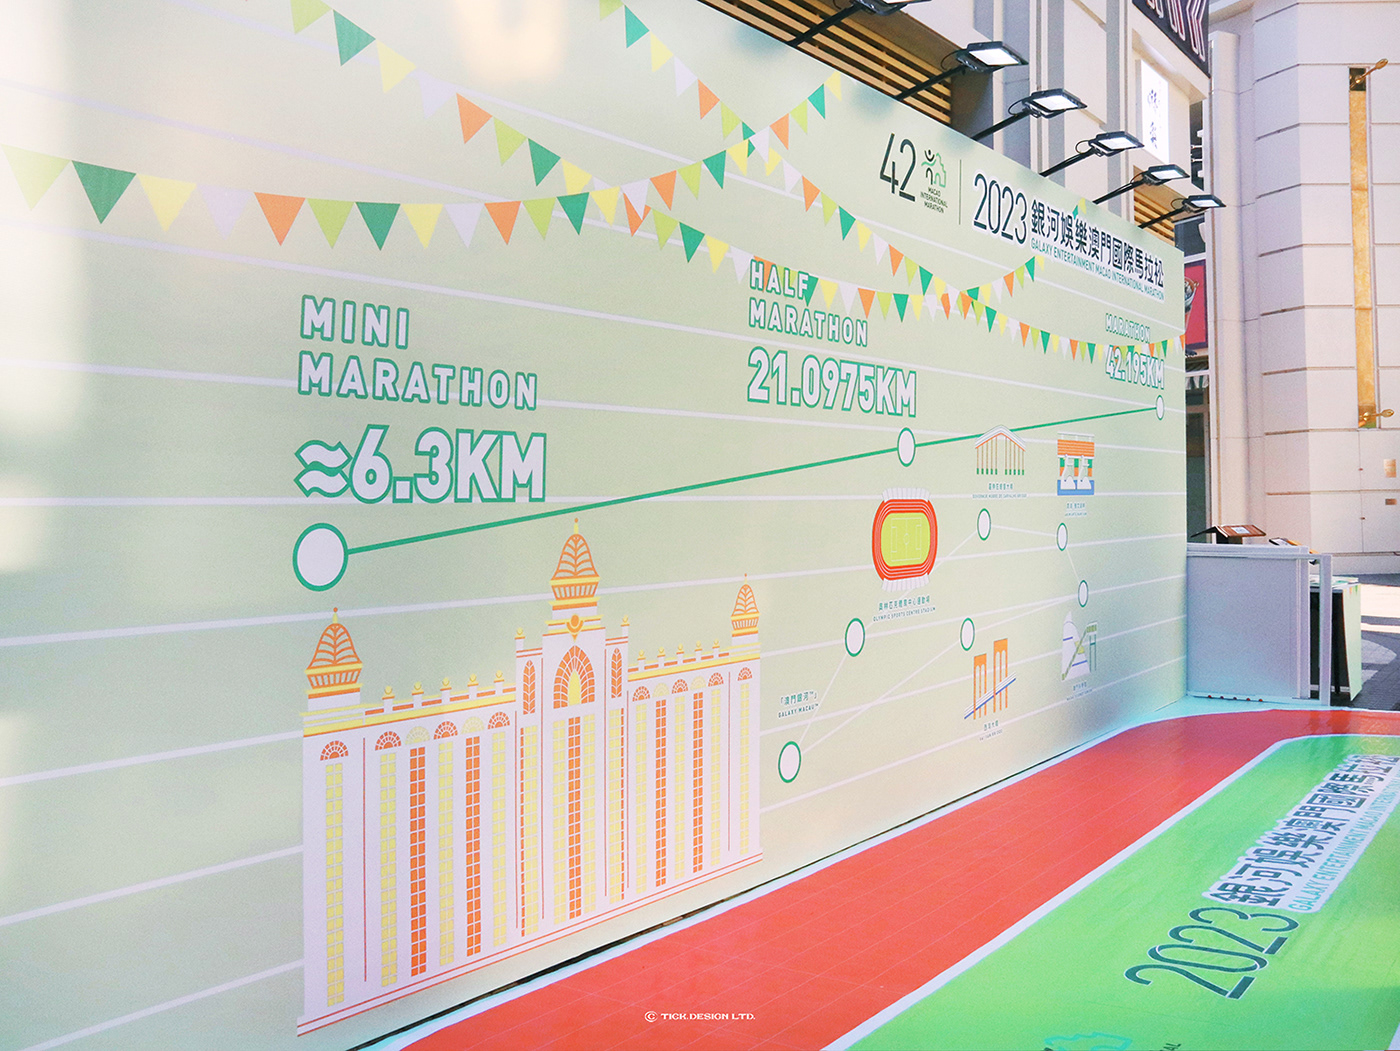 Macao Marathon Carnival run Medal booth running Event game Competition